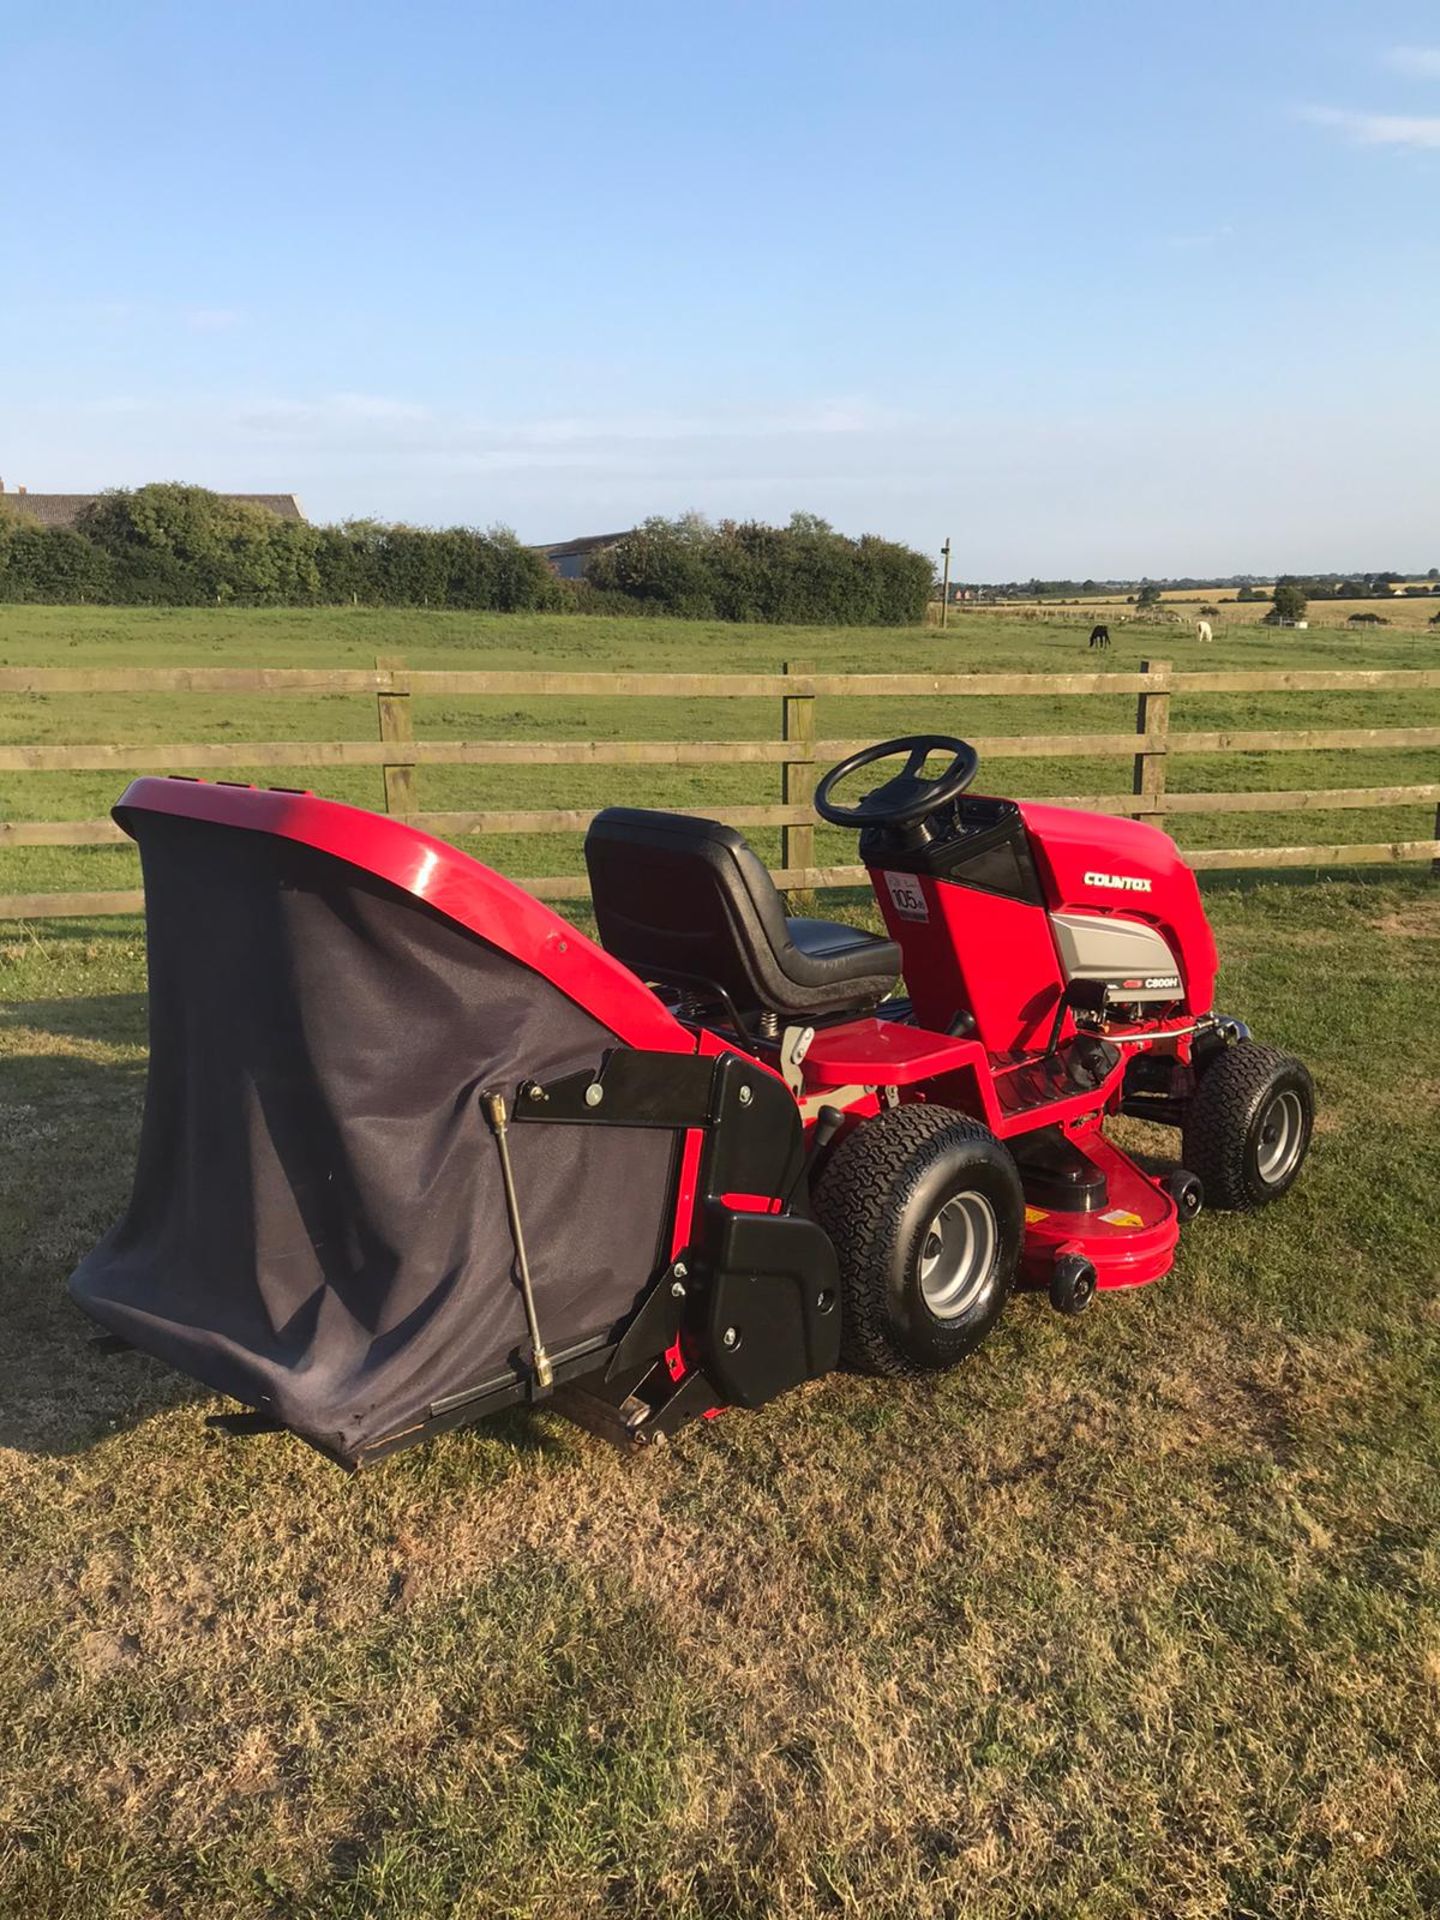 COUNTAX C800H 4WD RIDE ON LAWN MOWER, RUNS, DRIVES AND CUTS, CLEAN MACHINE, GREAT CONDITION - Image 5 of 6